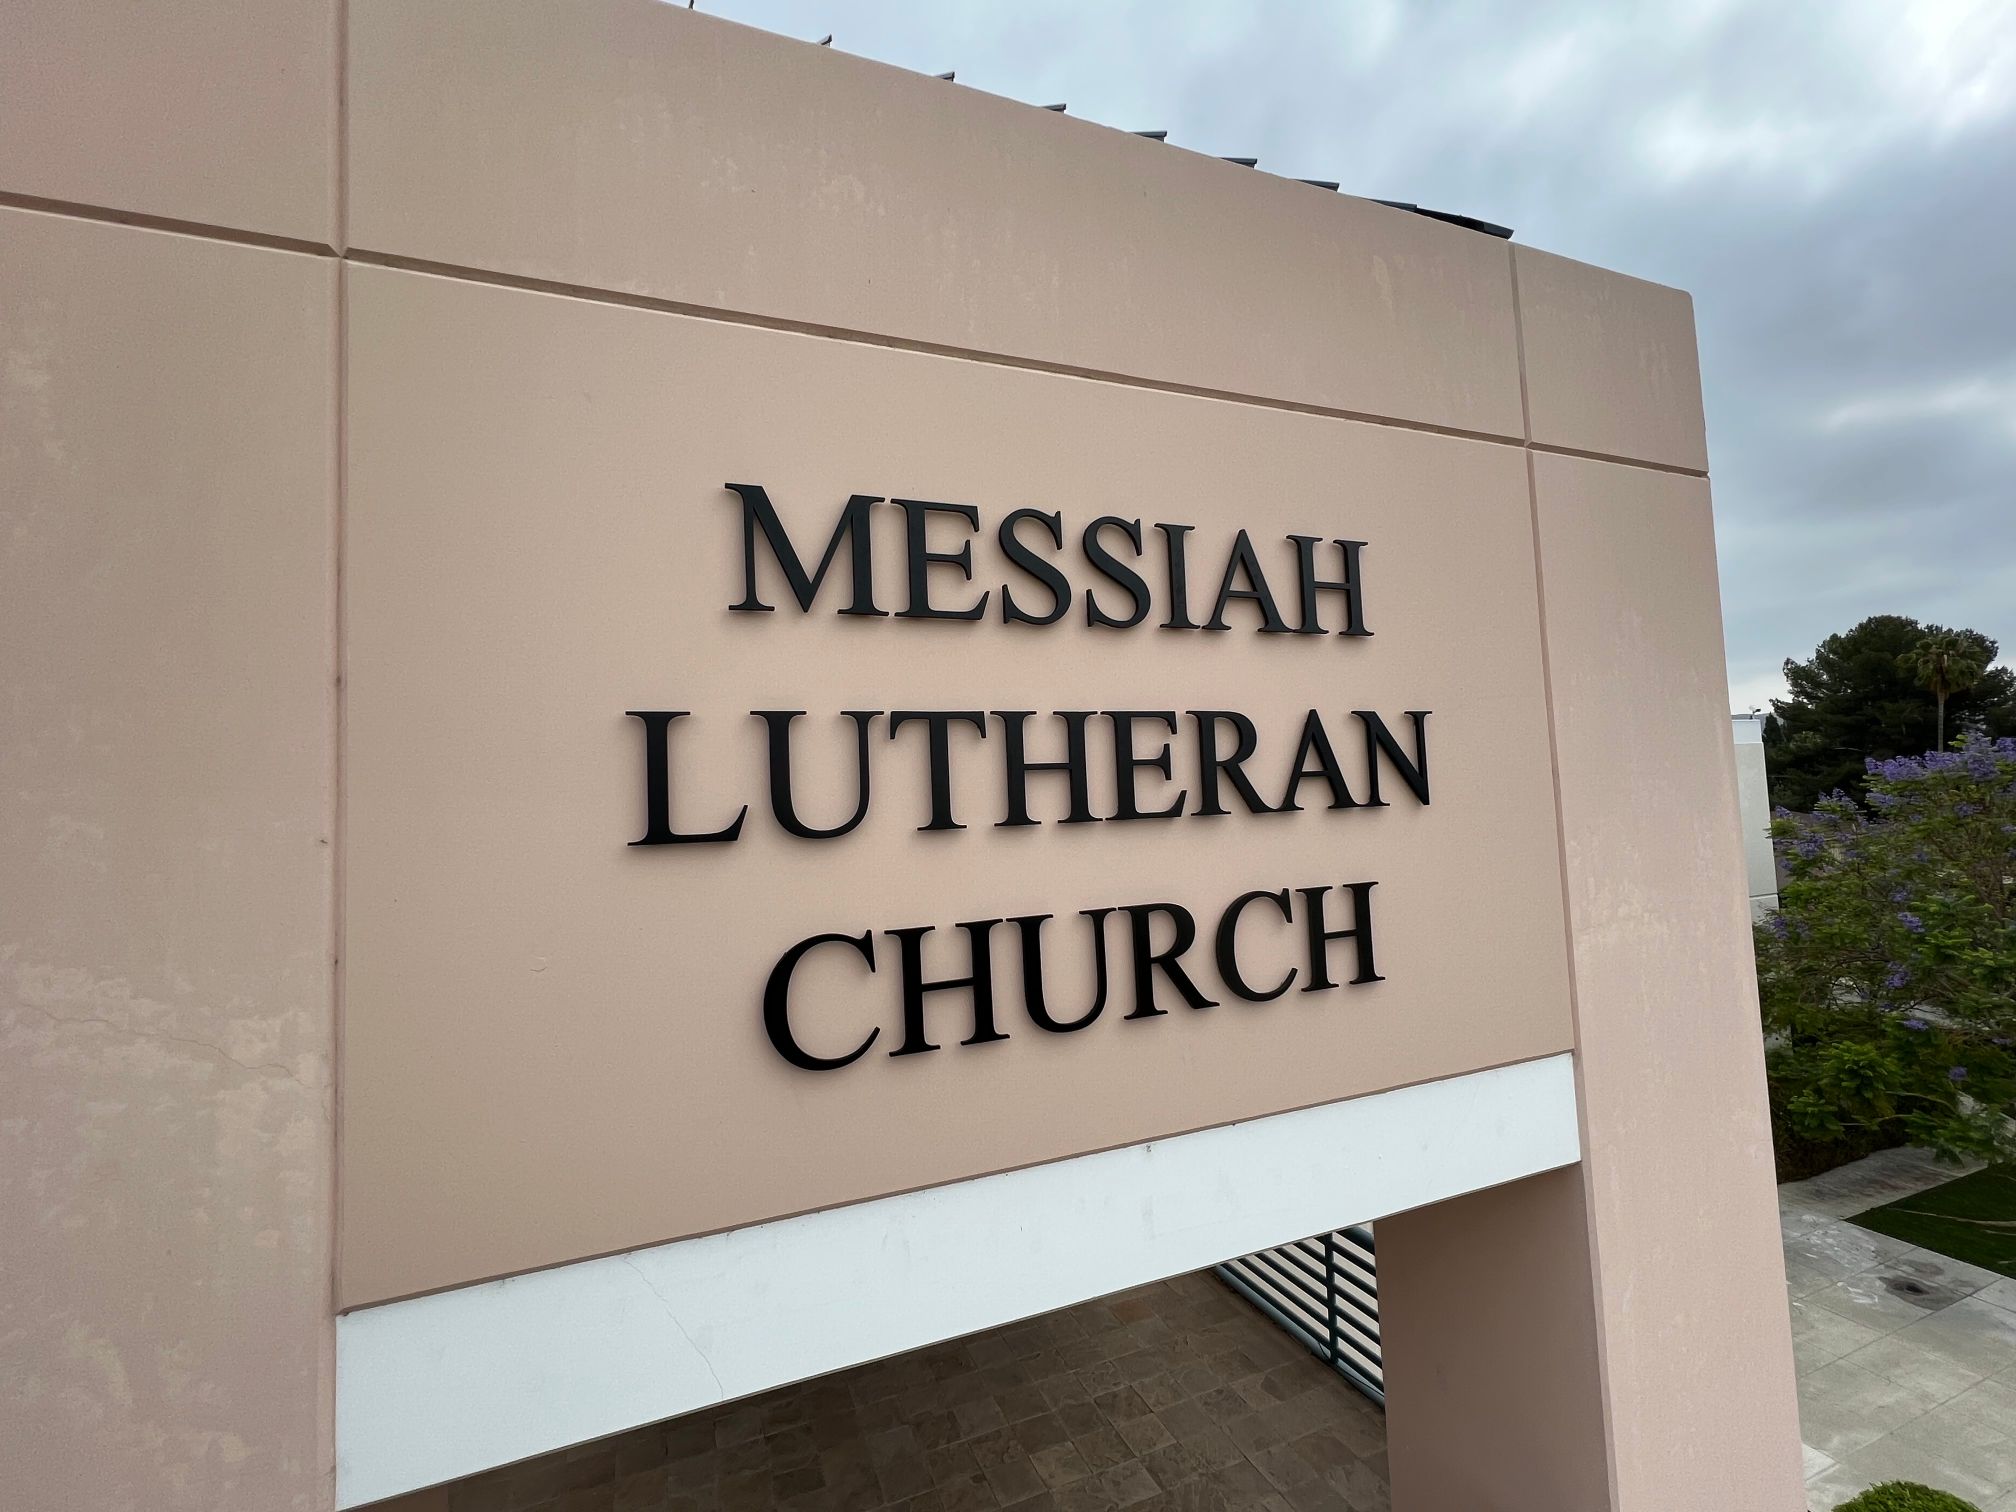 Brushed Aluminum Building Lettering for Lutheran Church in Orange County CA